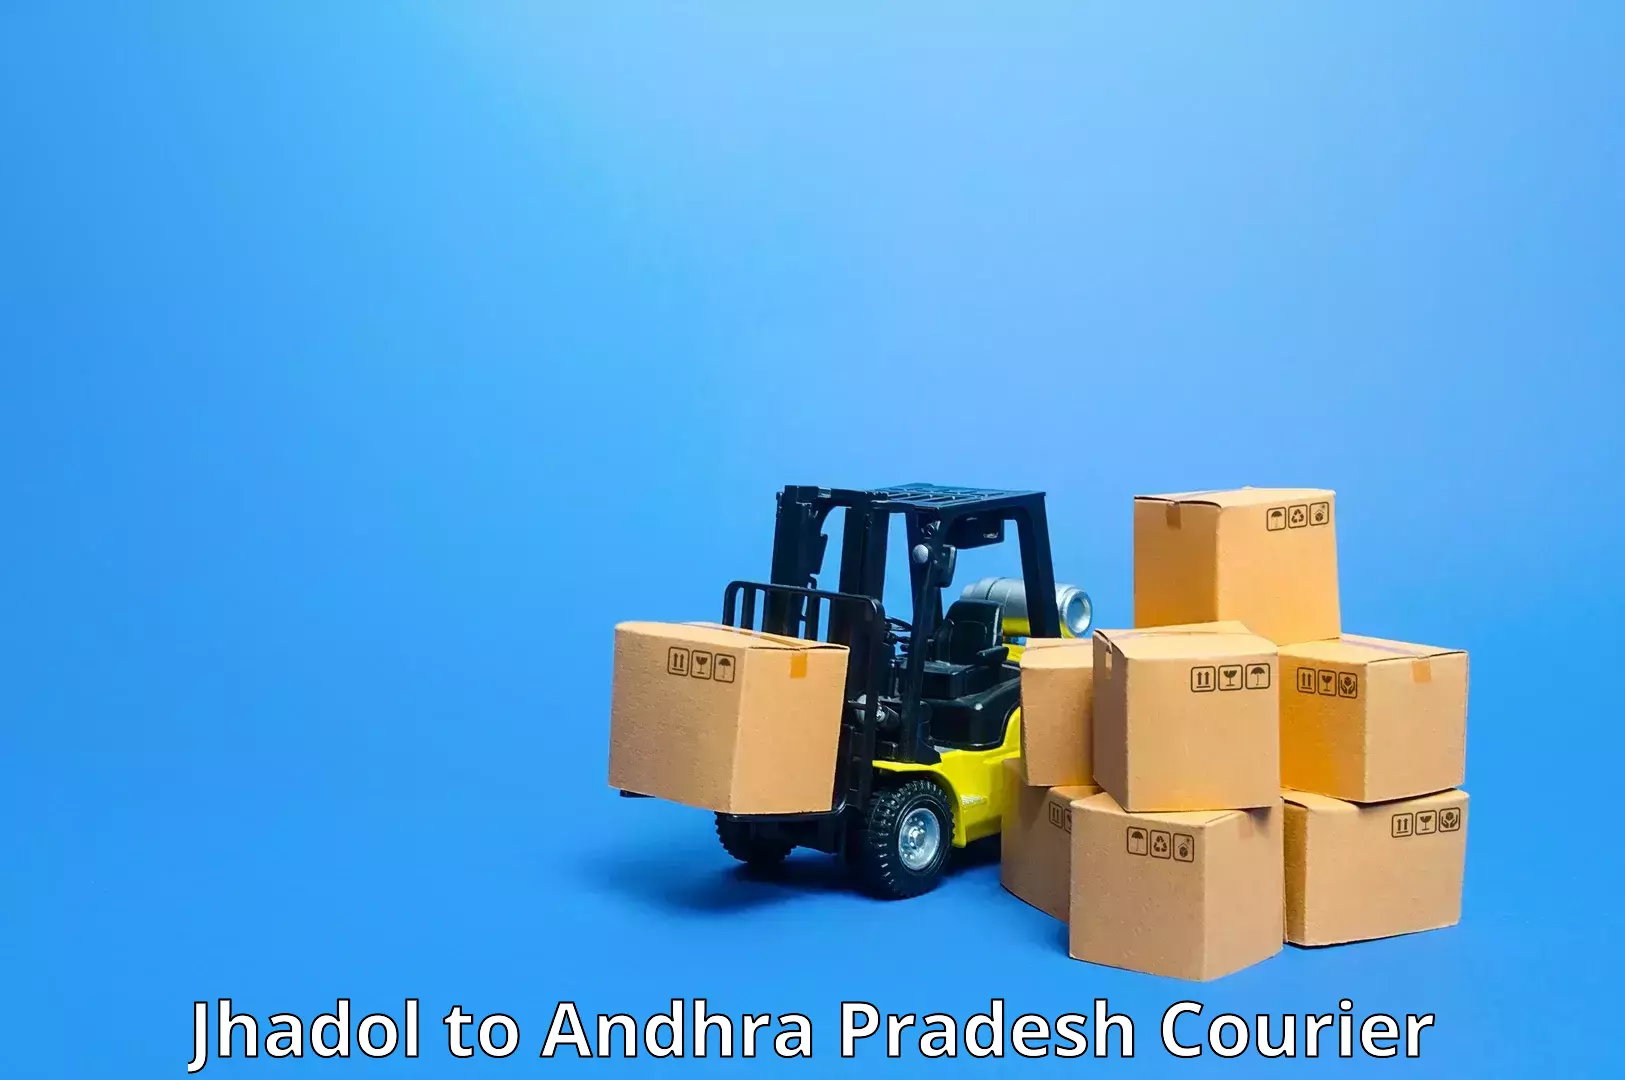 Subscription-based courier Jhadol to Rayachoti